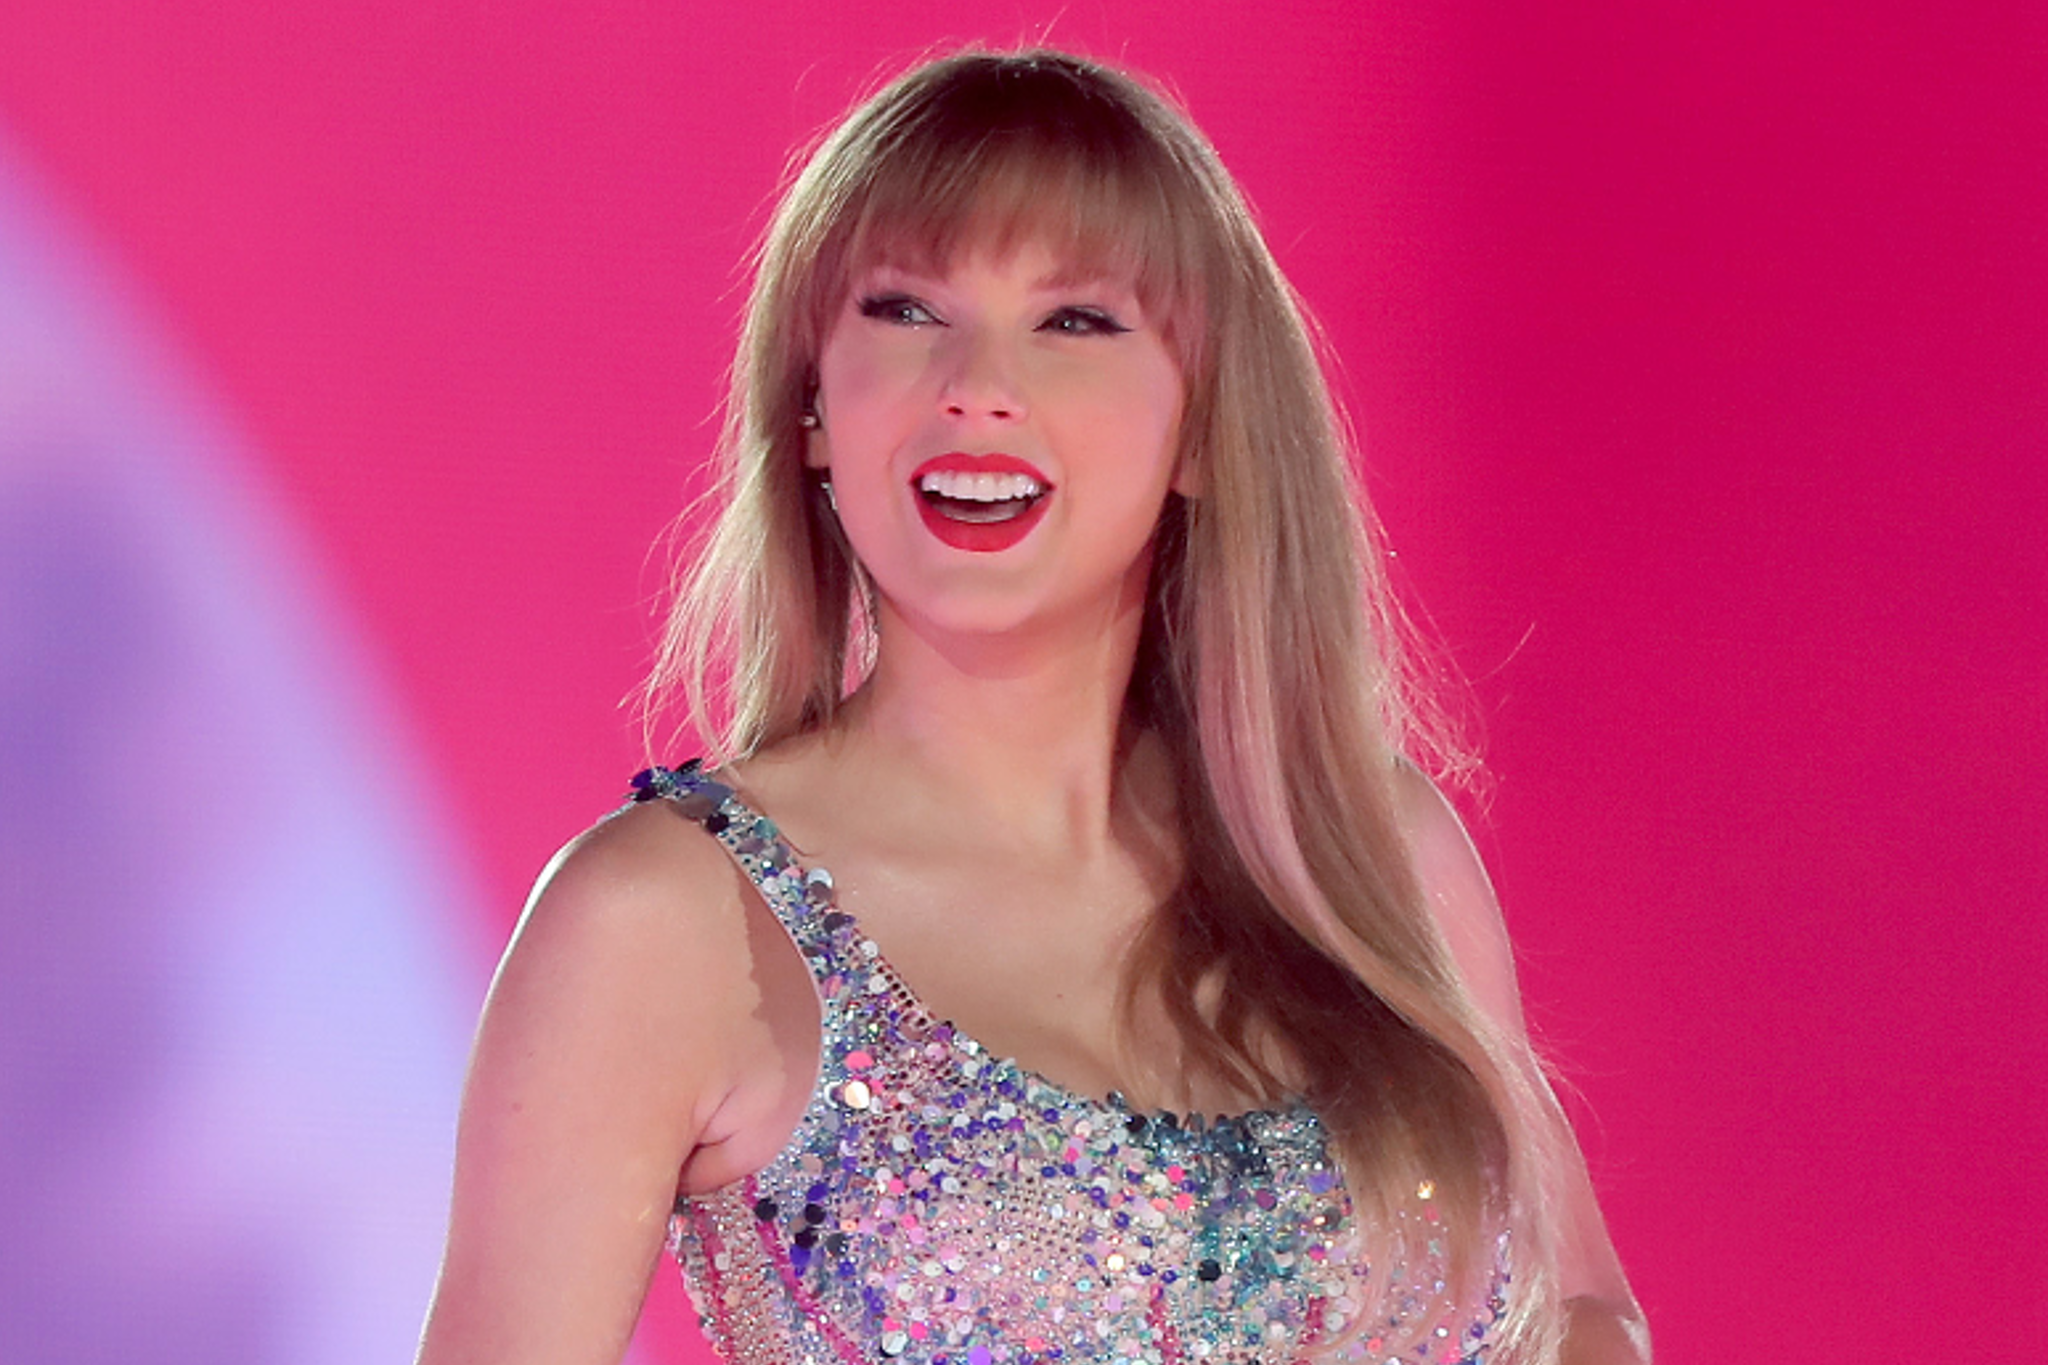 Swift’s album has achieved the biggest debut in years